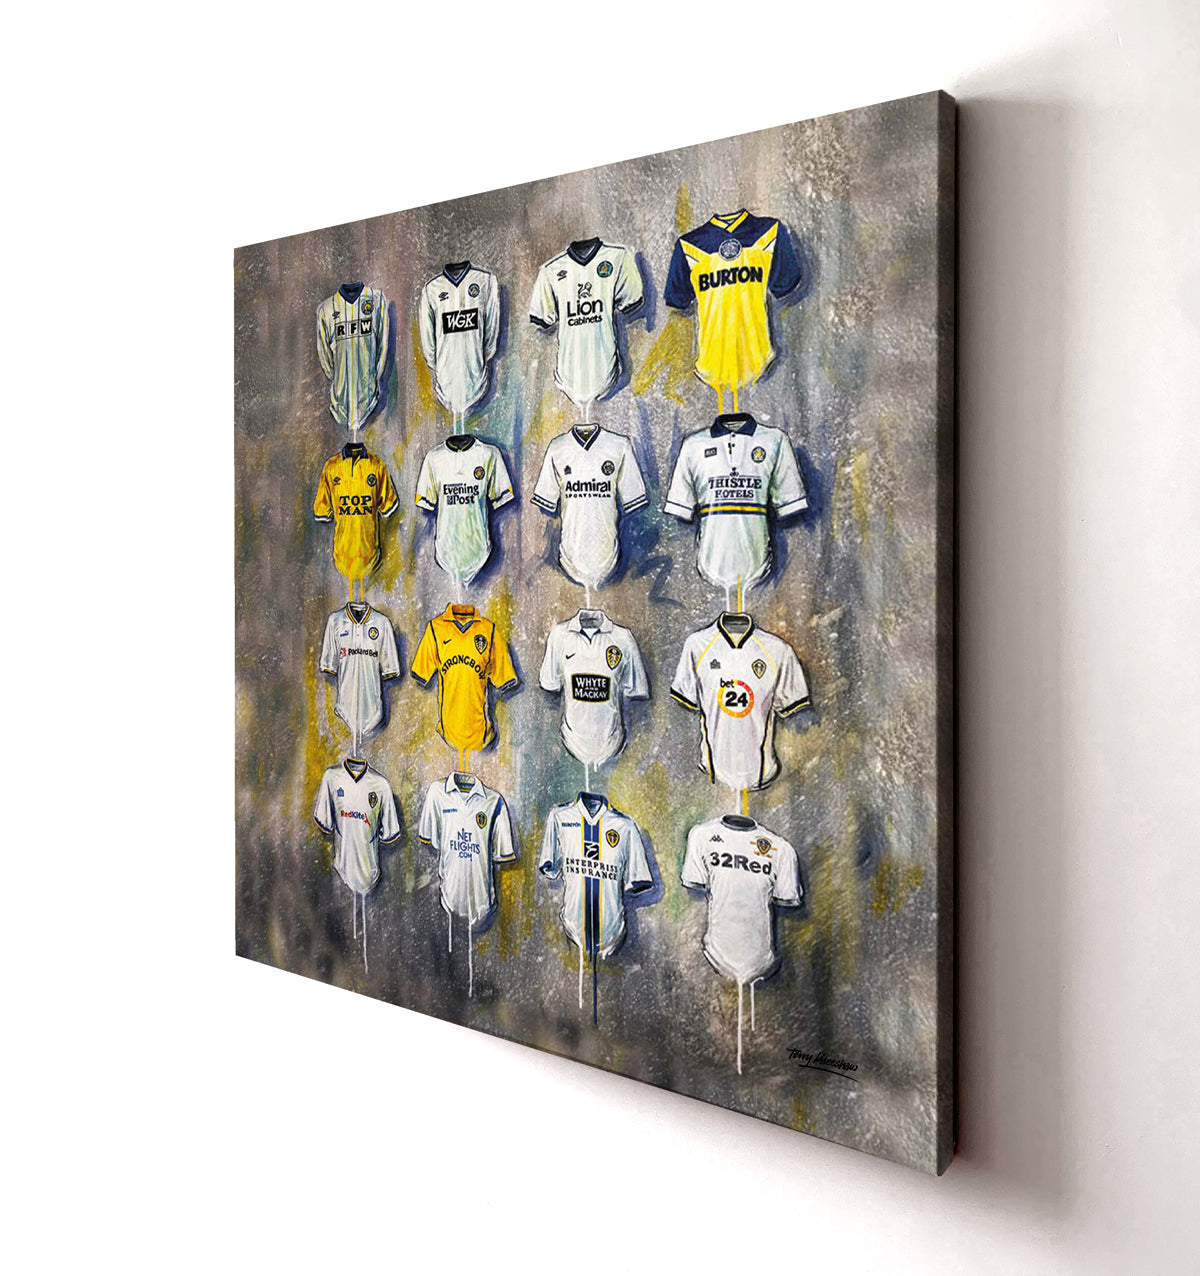 The Terry Kneeshaw Leeds Canvases depict various scenes and moments from the history of Leeds United Football Club. These canvases come in various sizes, including 20x20, 30x30, or 40x40, and are available either framed or unframed with a black floating frame. The images on the canvases capture the passion and energy of Leeds United fans and the team, celebrating its legendary players and achievements. These canvases are a must-have for any dedicated Leeds United supporter.